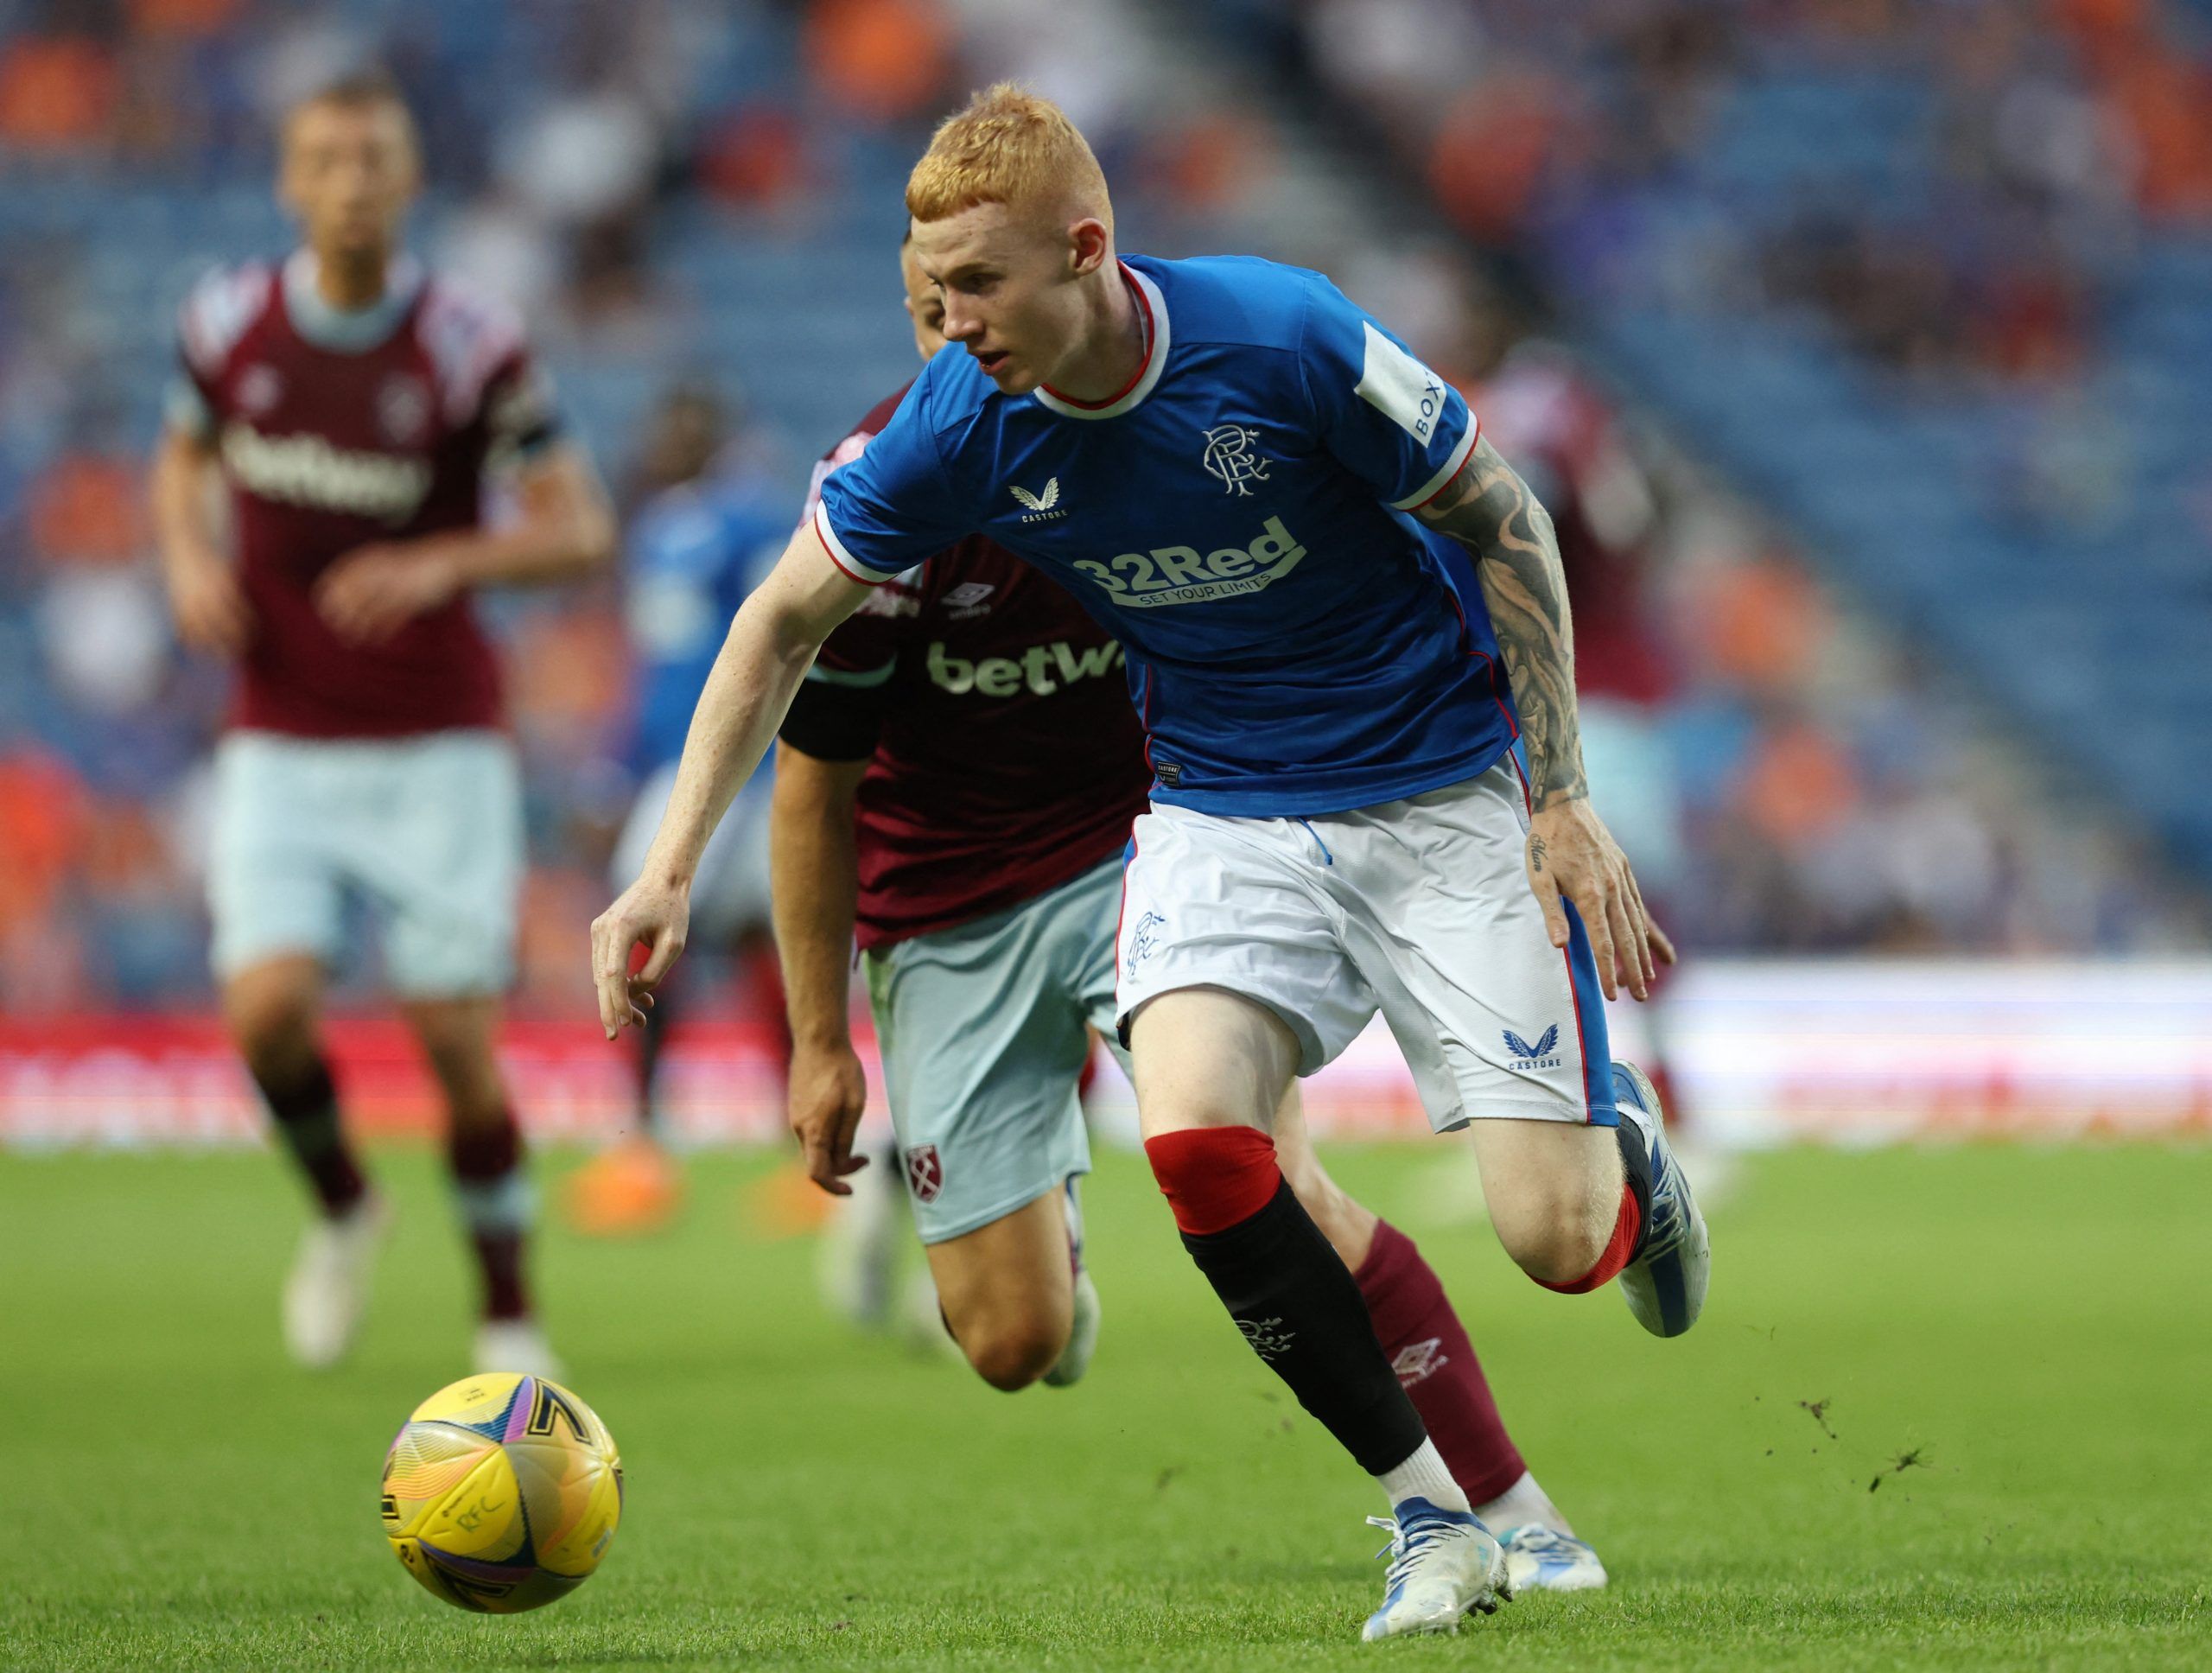 Rangers: Gers have ‘opened talks’ over new contract for Adam Devine -Rangers News